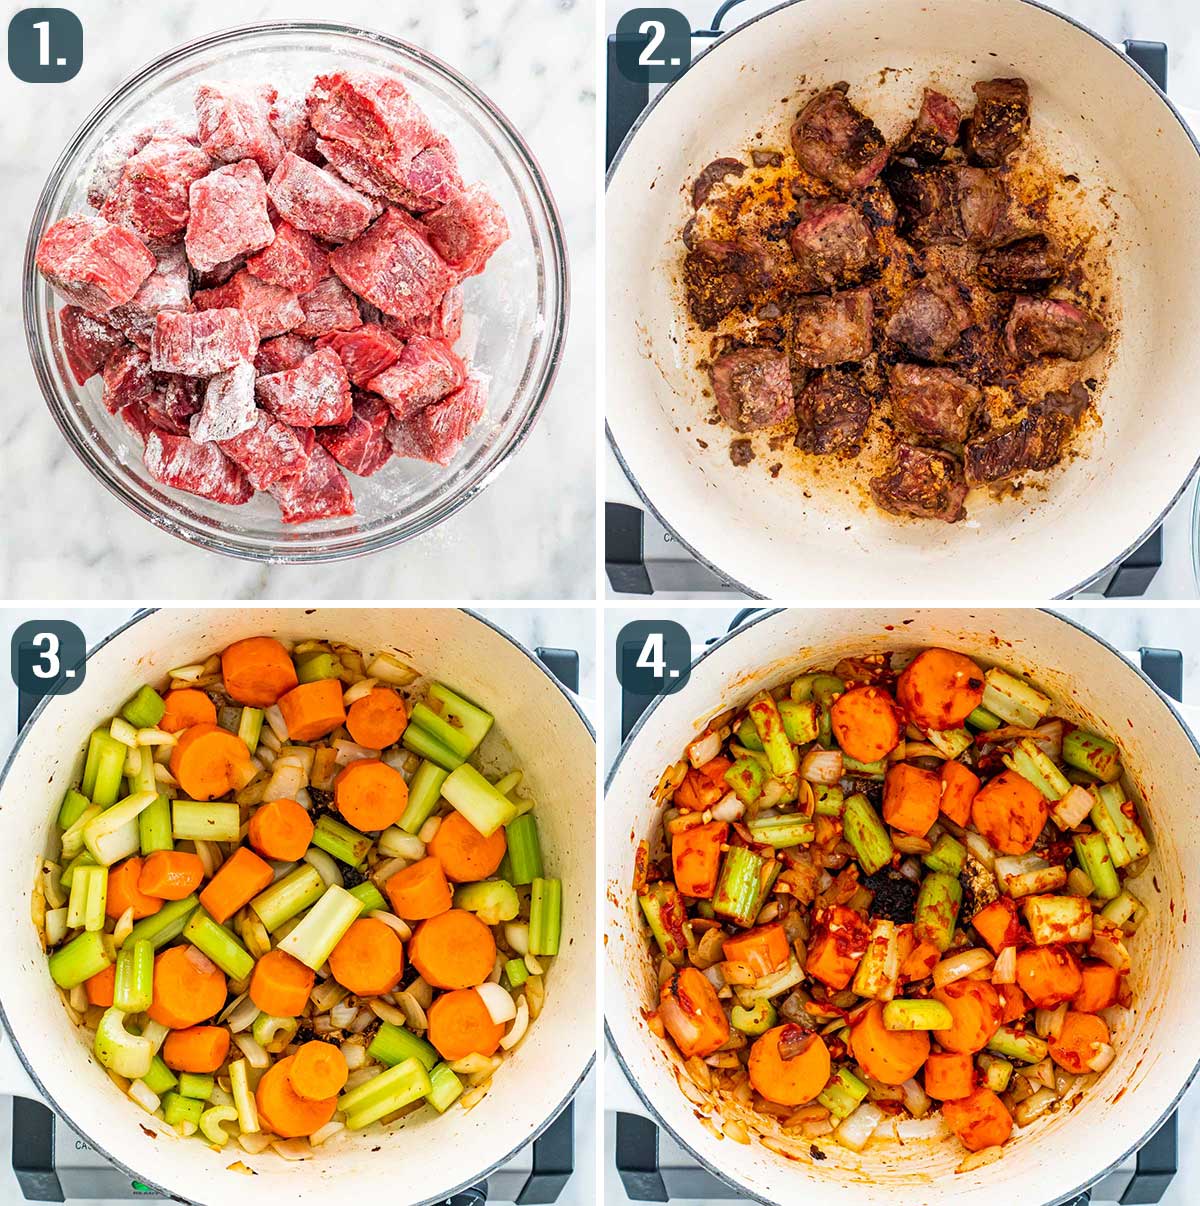 process shots showing how to make beef stew.